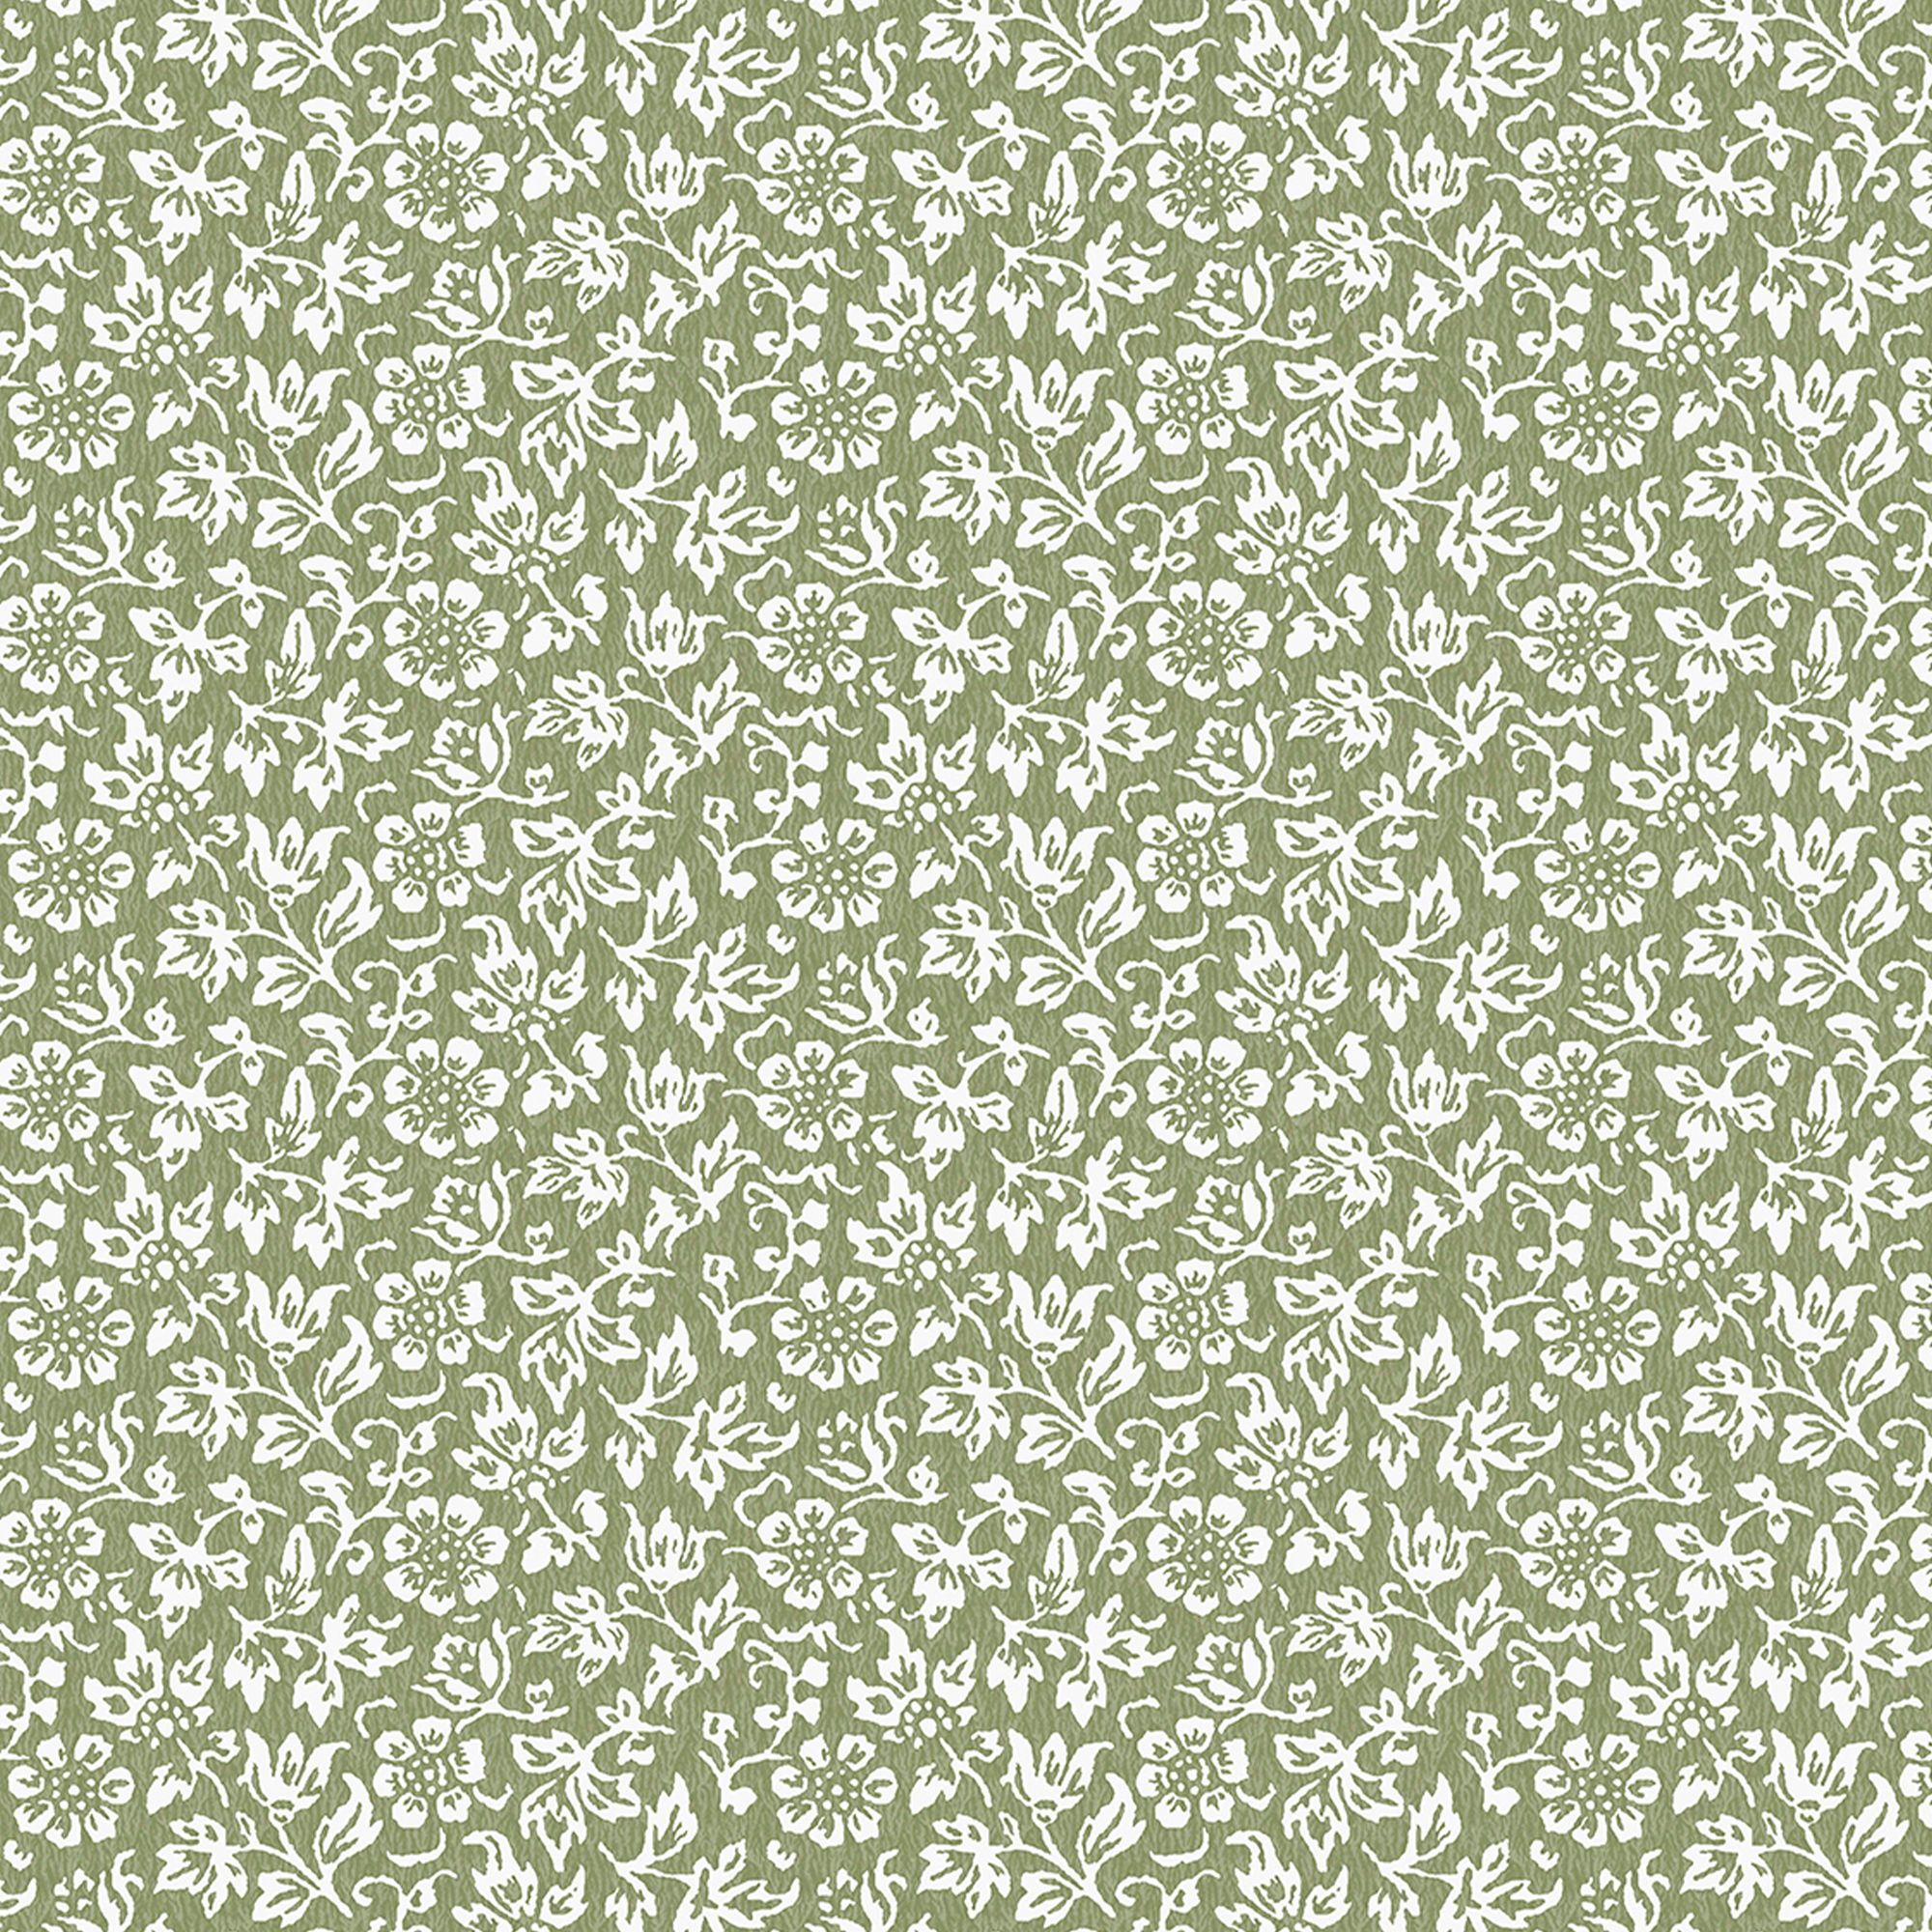 Laura Ashley The Wholesome Home Sweet Alyssum Moss Green Smooth Wallpaper